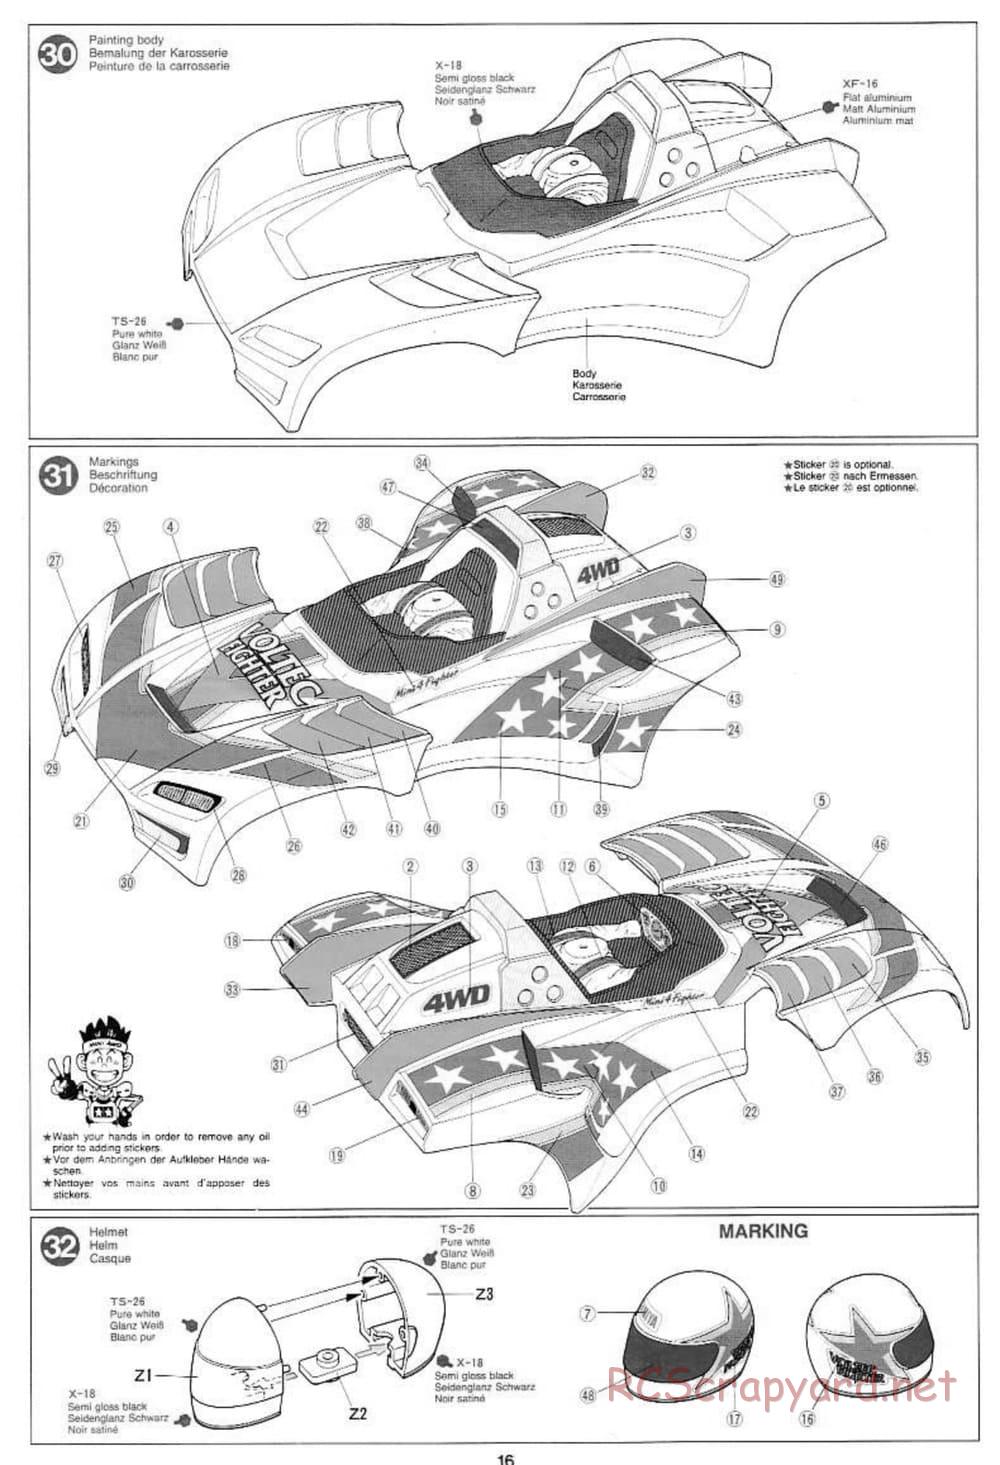 Tamiya - Voltec Fighter - Boy's 4WD Chassis - Manual - Page 16